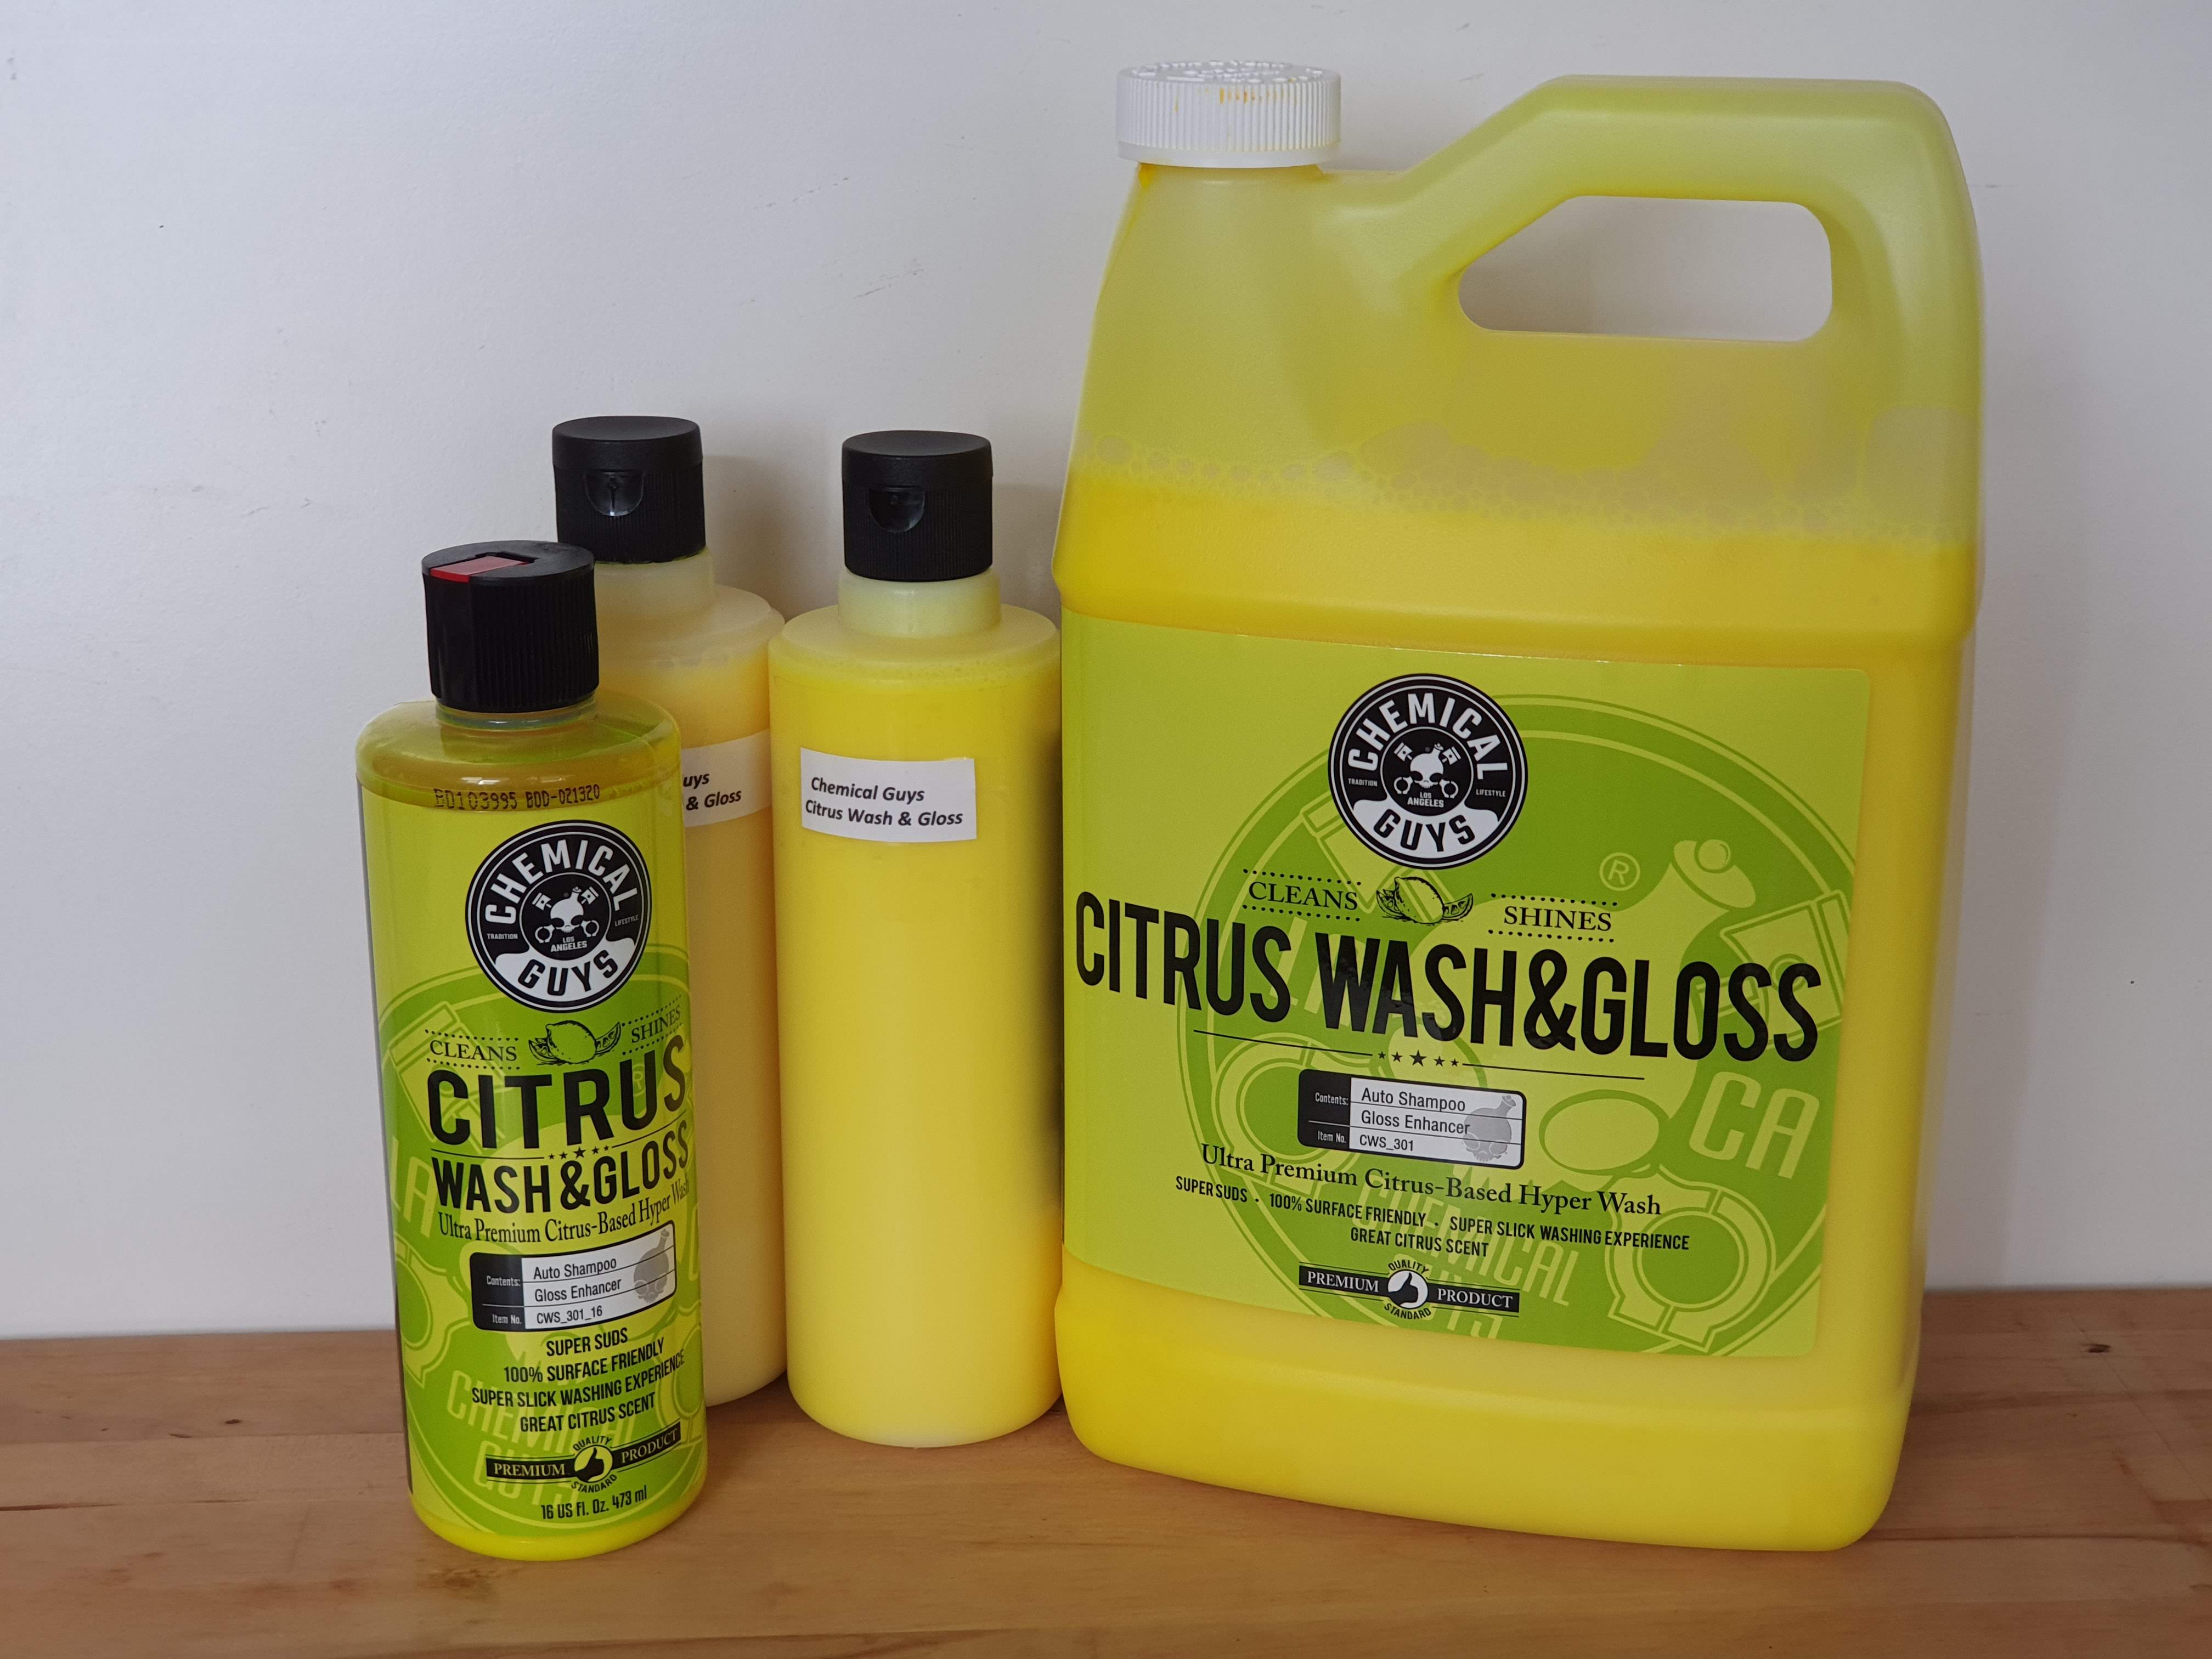 Chemical Guys Citrus Wash & Gloss Concentrated Ultra Premium Hyper Wash,  473ml